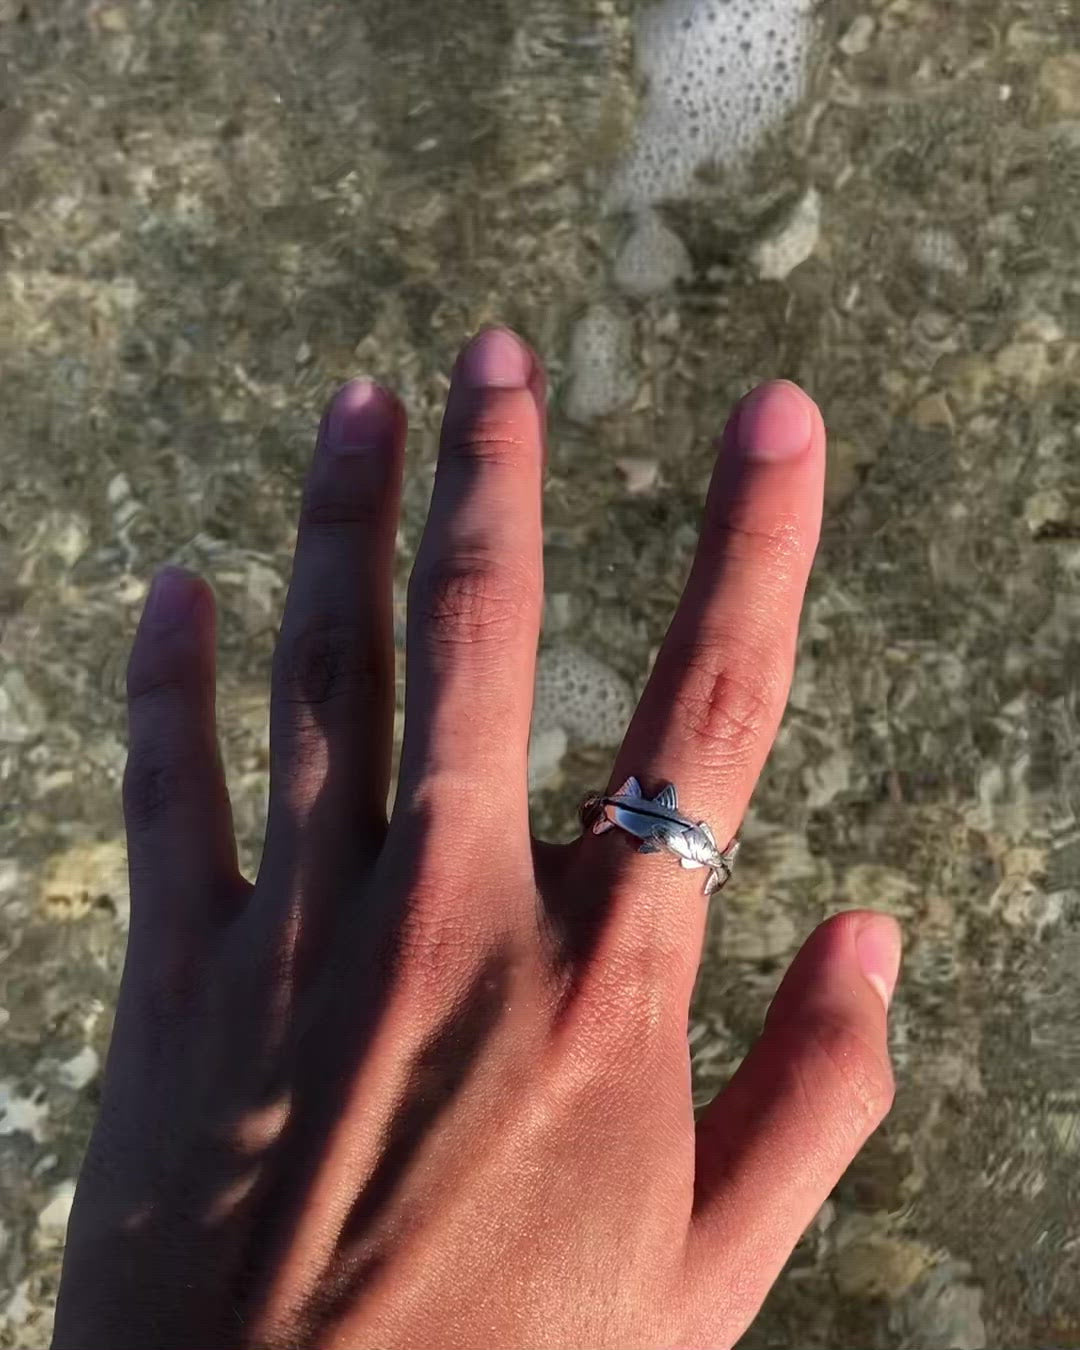 Video highlighting all of the details of the snook ring by Castil. Includes a black line reminiscent of an actual snook, made out of black epoxy.